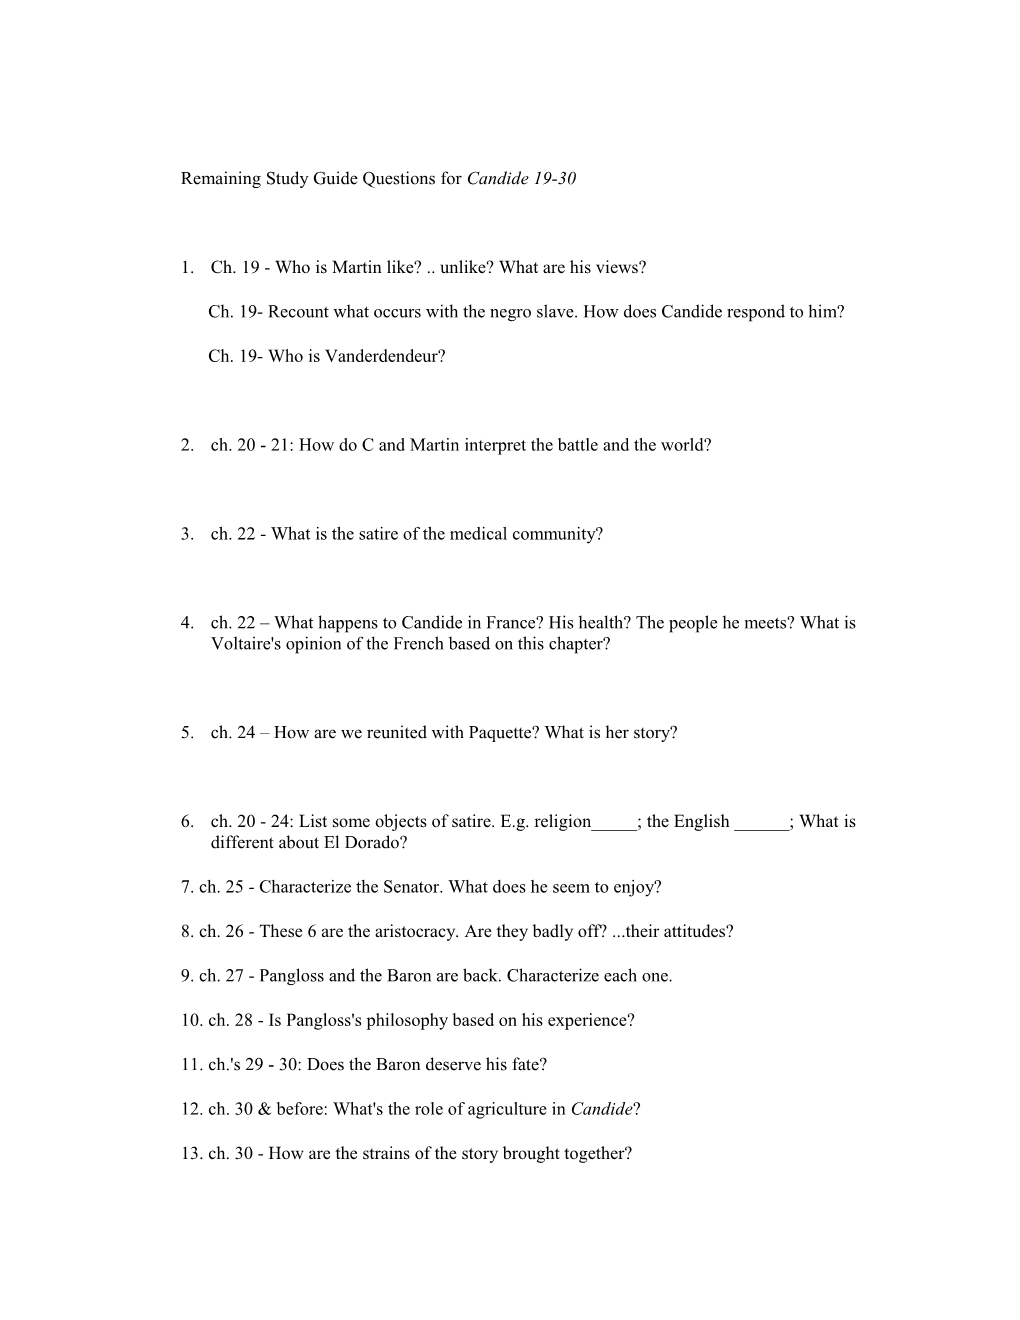 Remaining Study Guide Questions for Candide 19-30